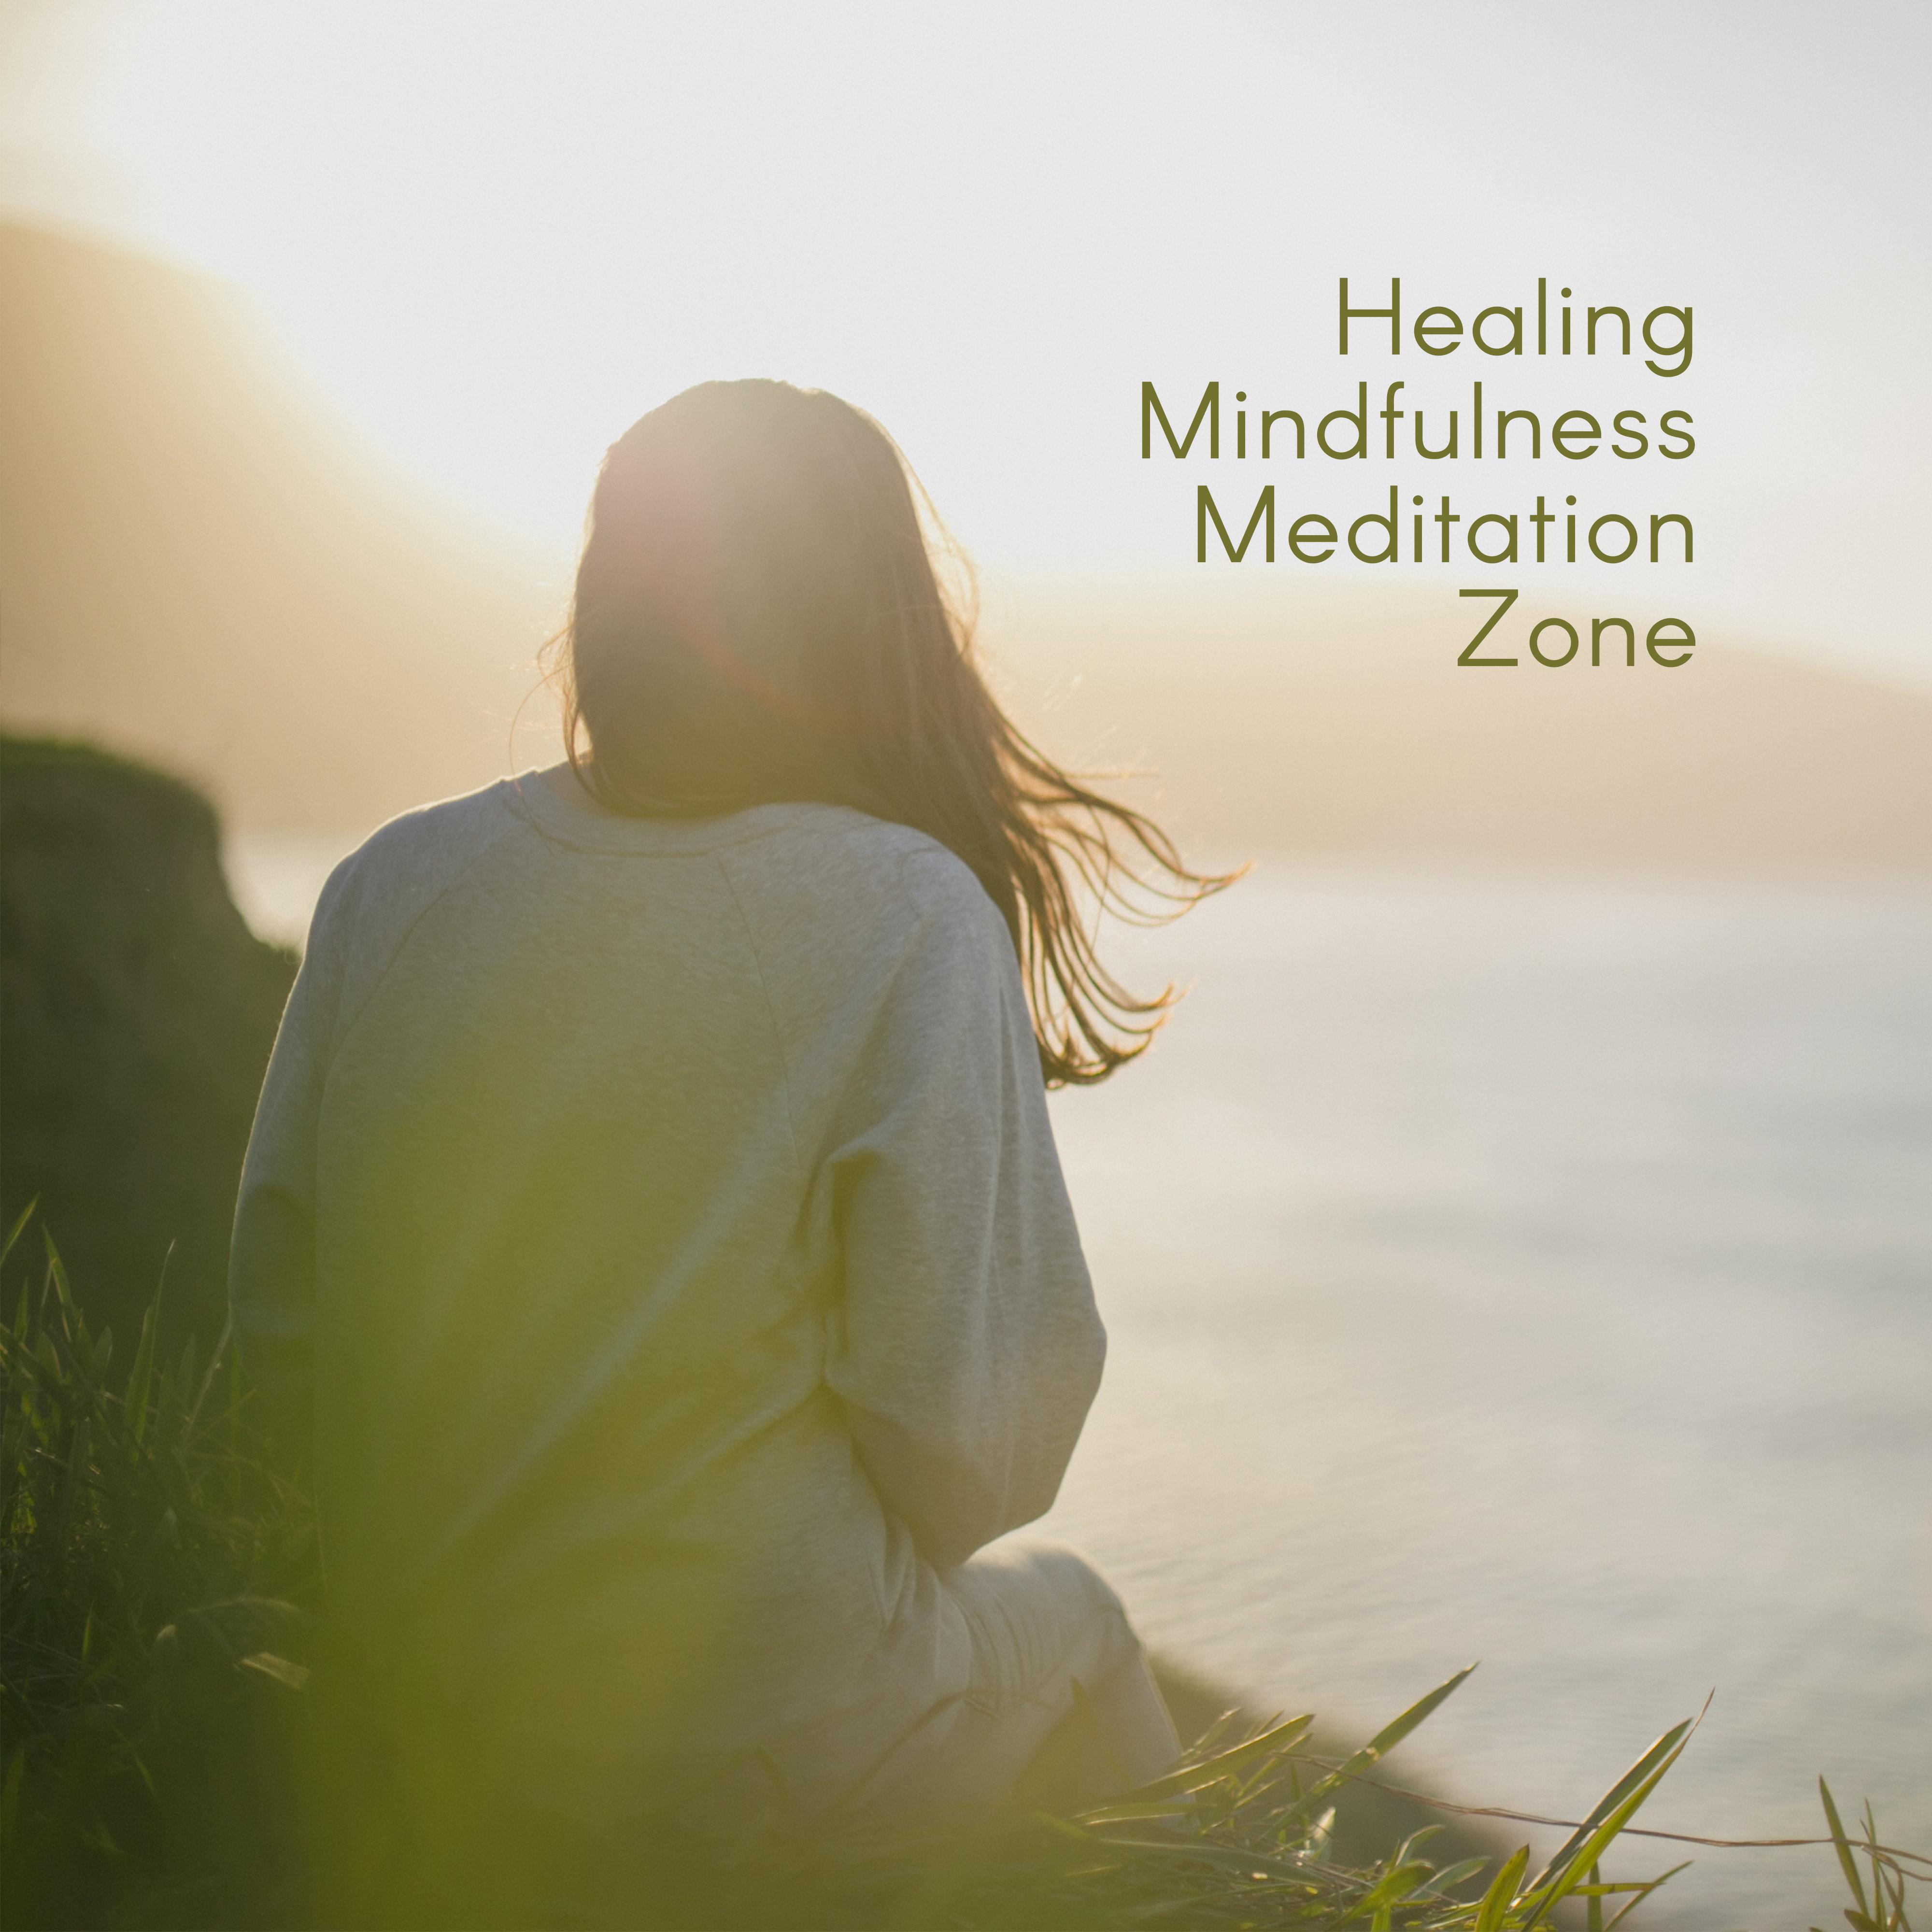 Healing Mindfulness Meditation Zone – Yoga Therapy New Age Music for Deep Calmness, Slow Relax, Zen Flow